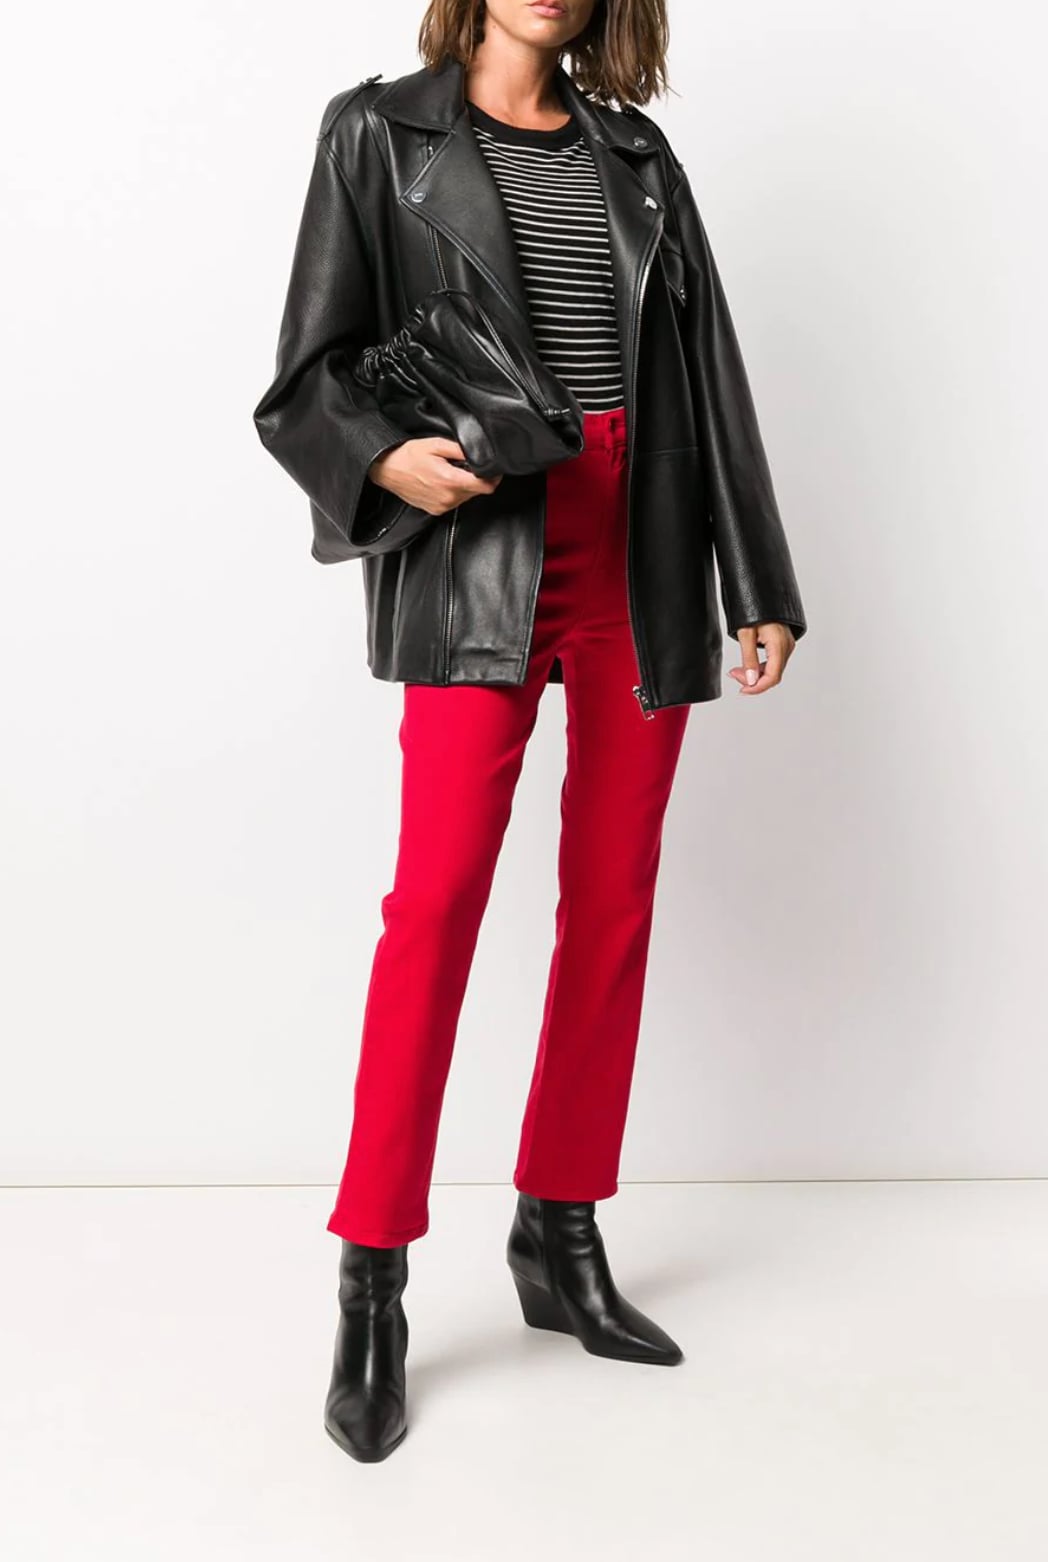 Zara Red Faux Leather Pants - Gem